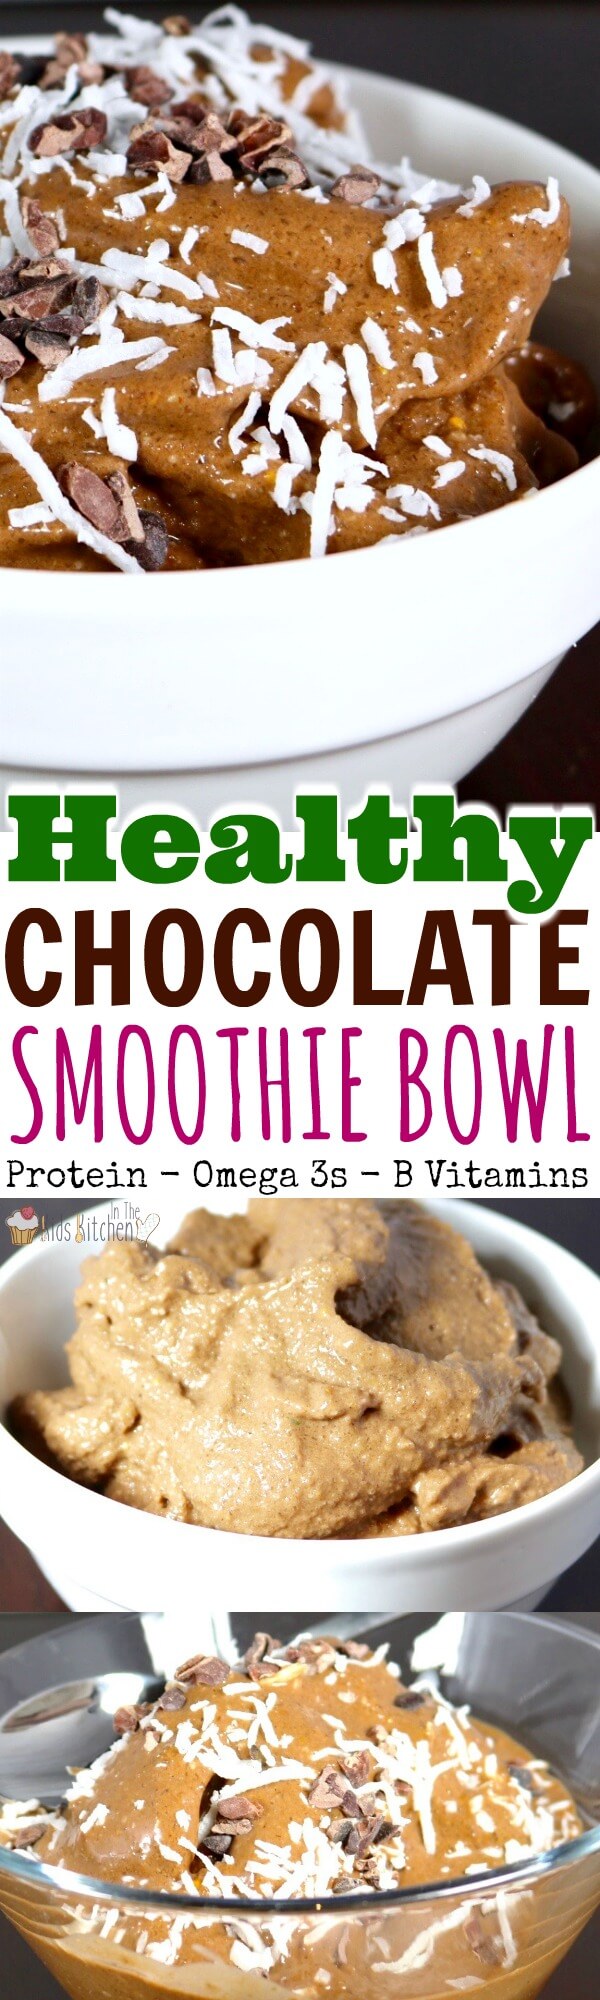 Chocolate ice cream for breakfast?! This Chocolate Smoothie Bowl tastes like dessert, but is healthy enough to eat anytime! Protein, antioxidants, B Vitamins, Omega 3s & more!